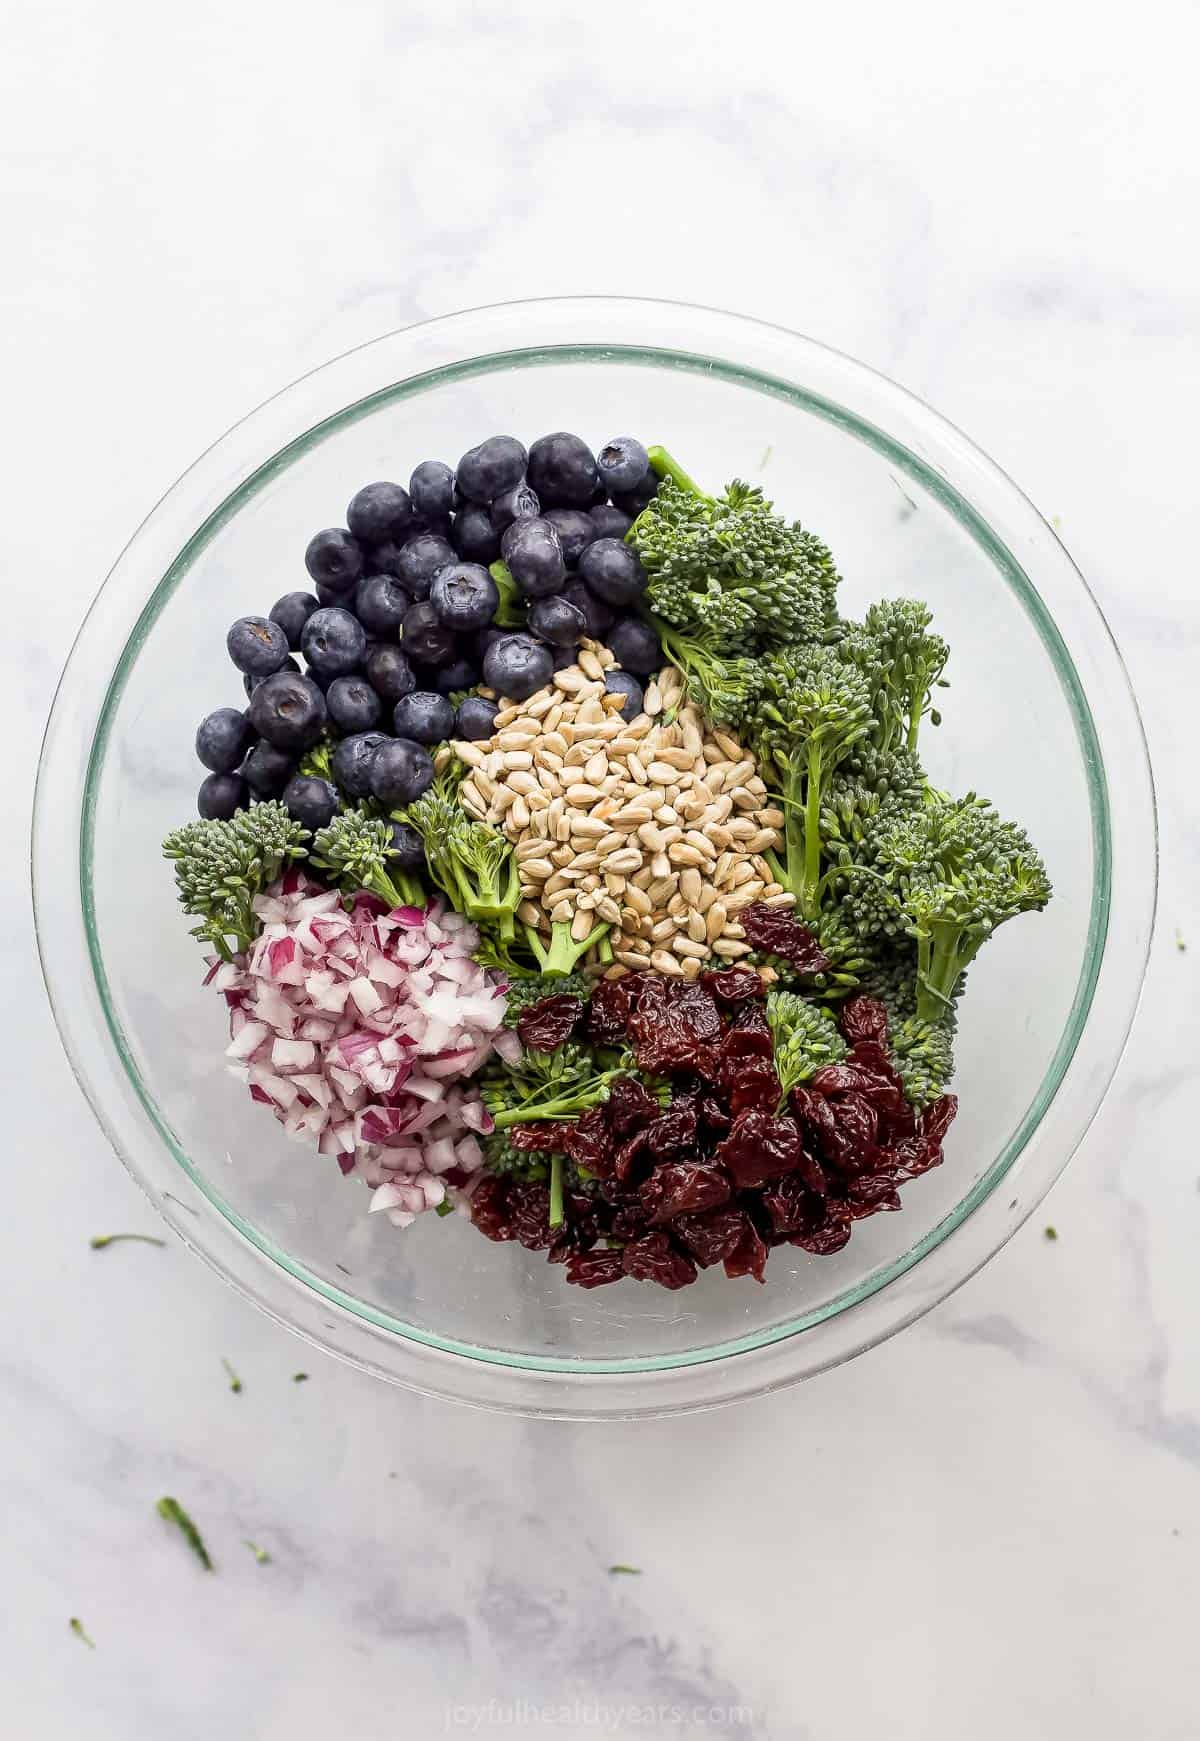 All of the broccolini salad ingredients in a large mixing bowl on top of a marble surface